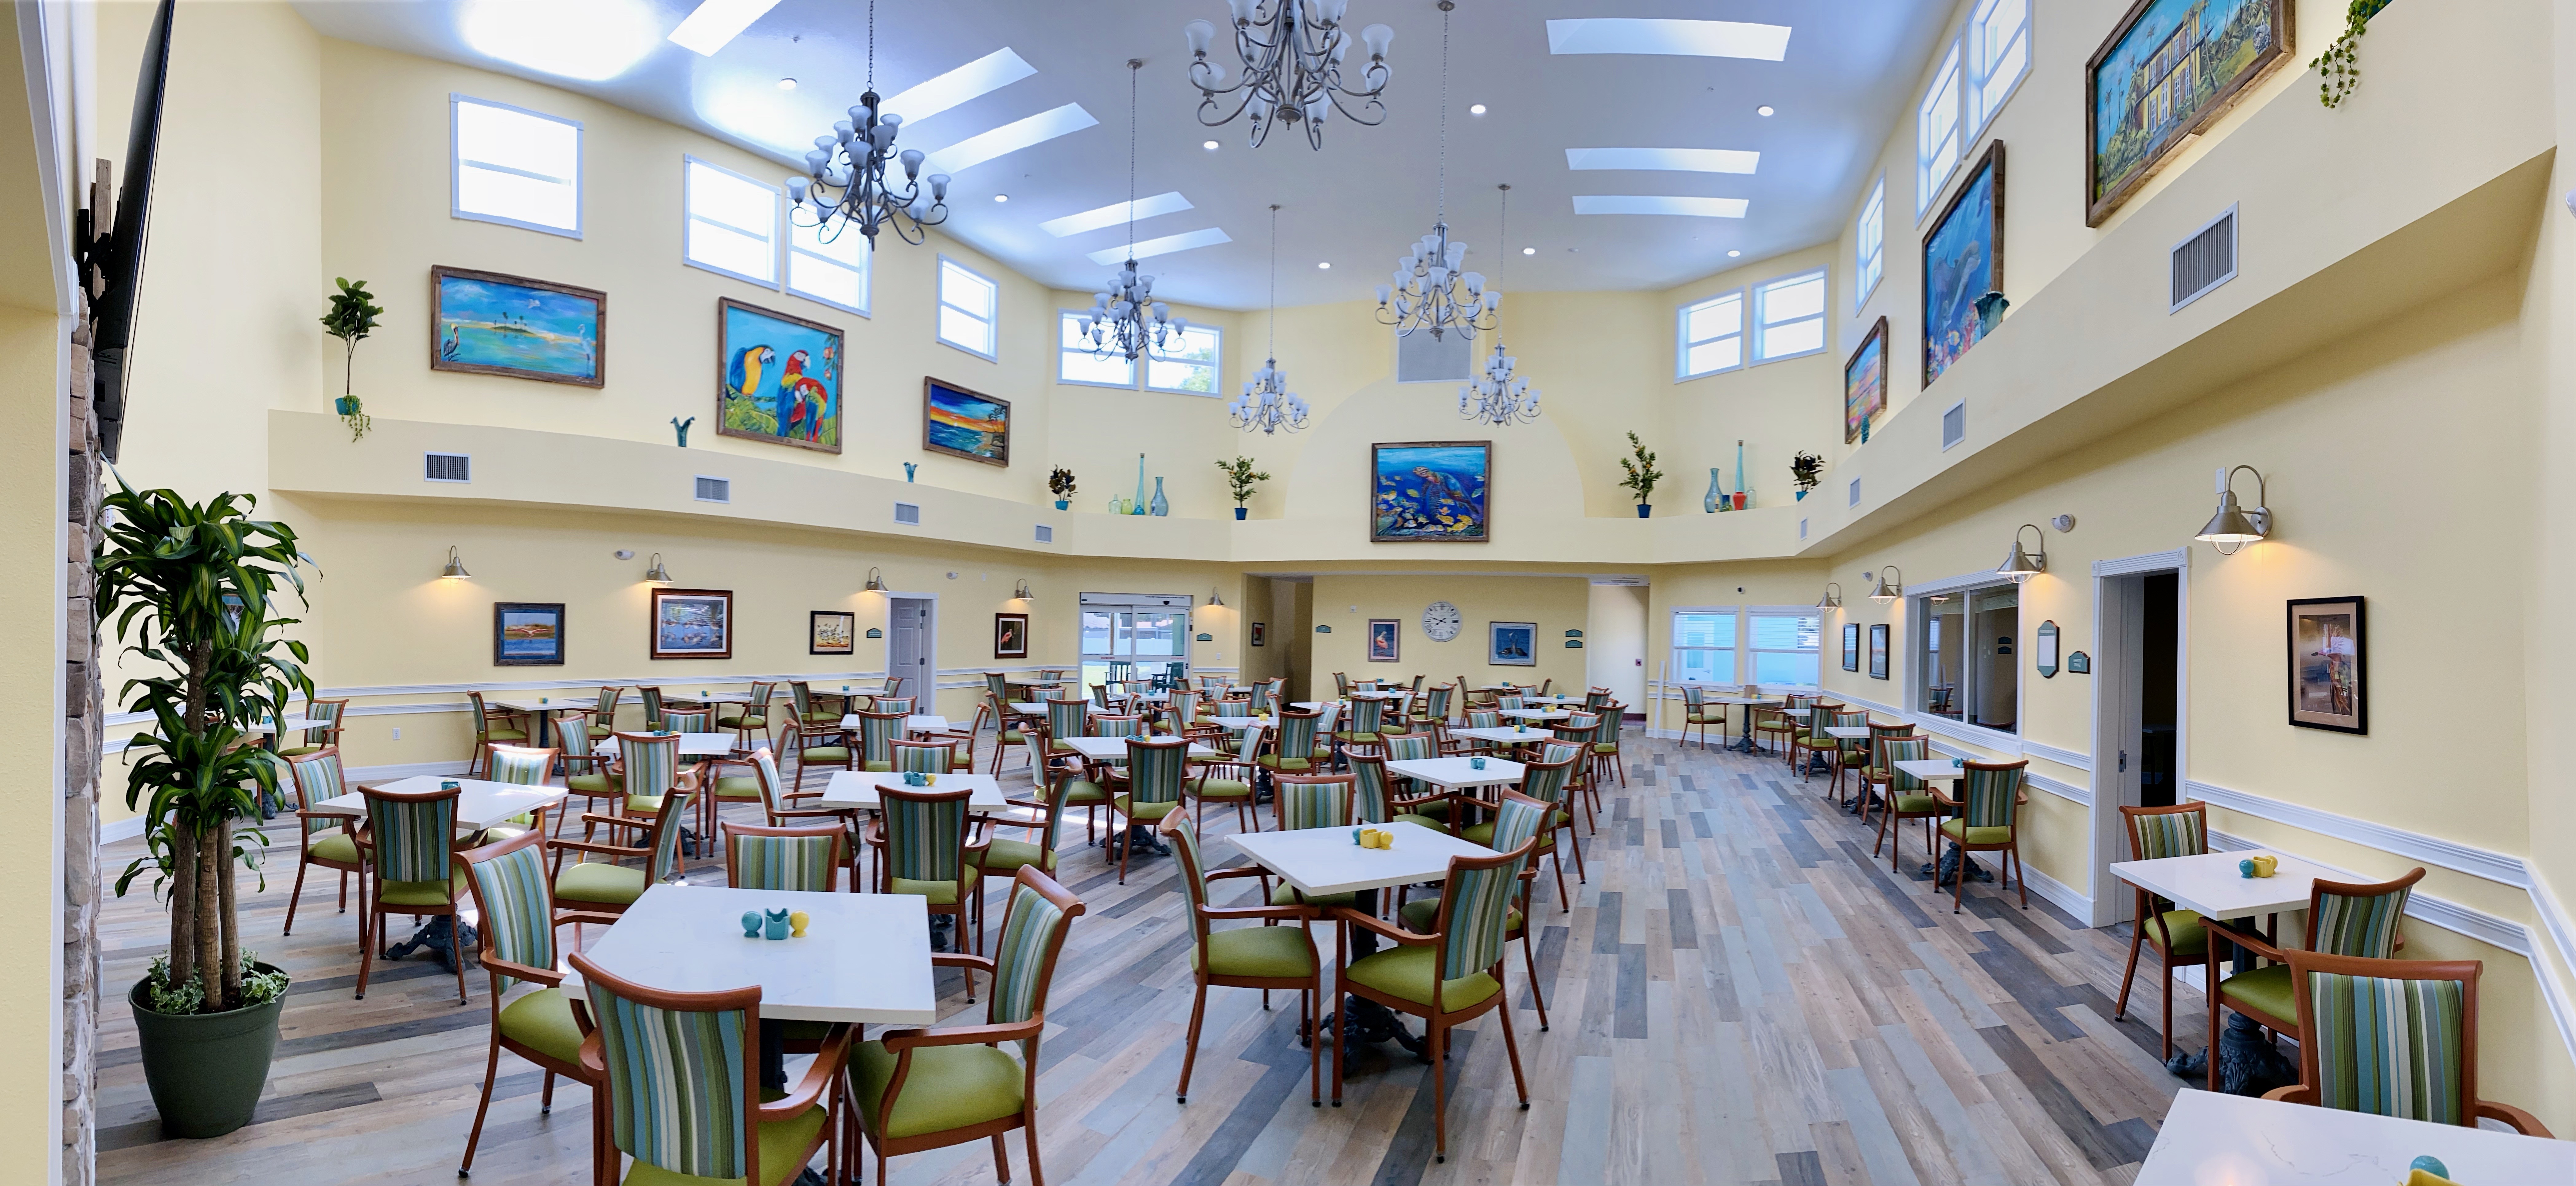 Trinity Place Assisted Living image